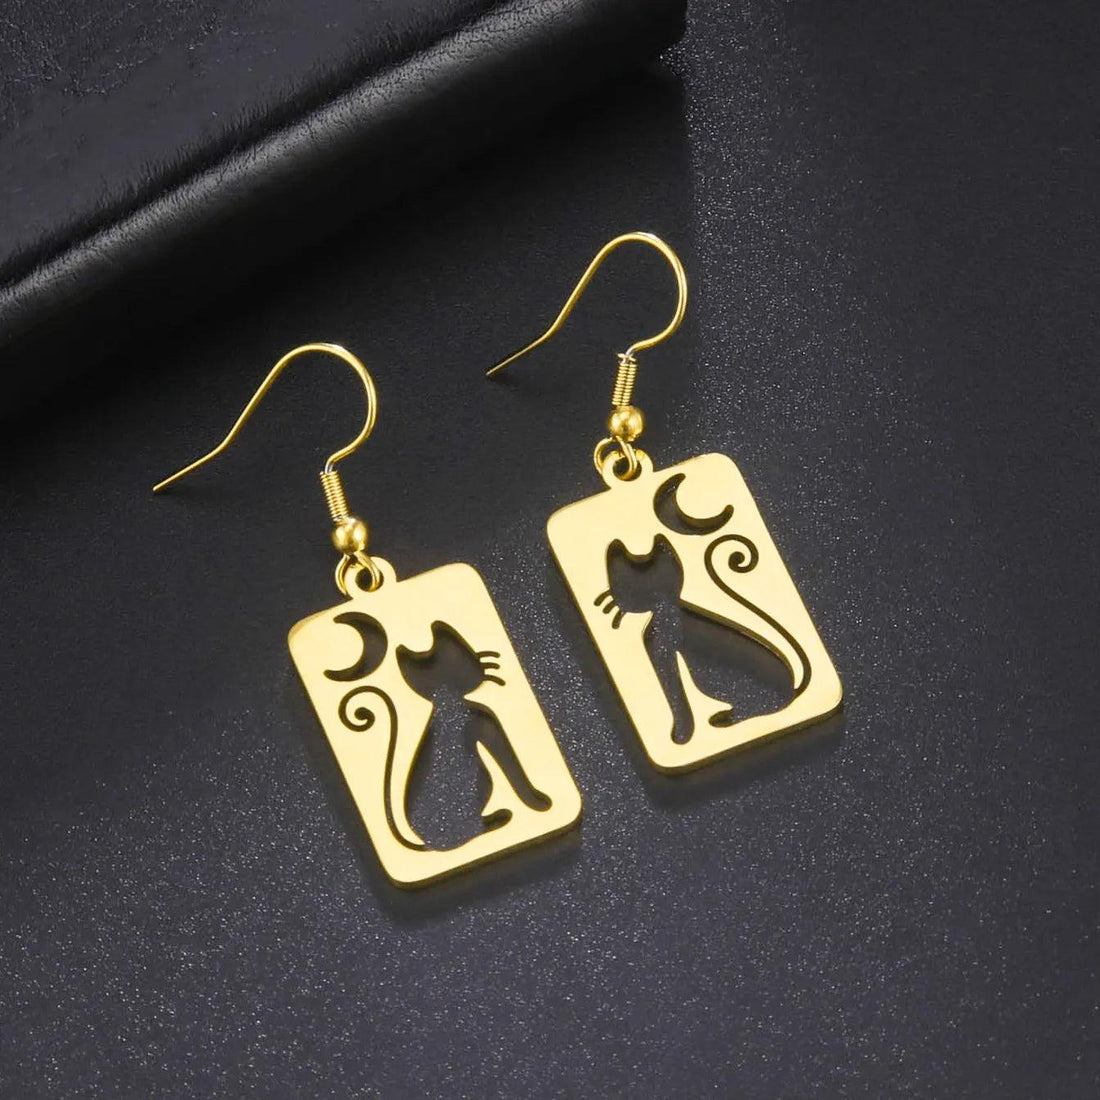 Crescent Moon Cat Stainless Steel Drop Earrings - Just Cats - Gifts for Cat Lovers